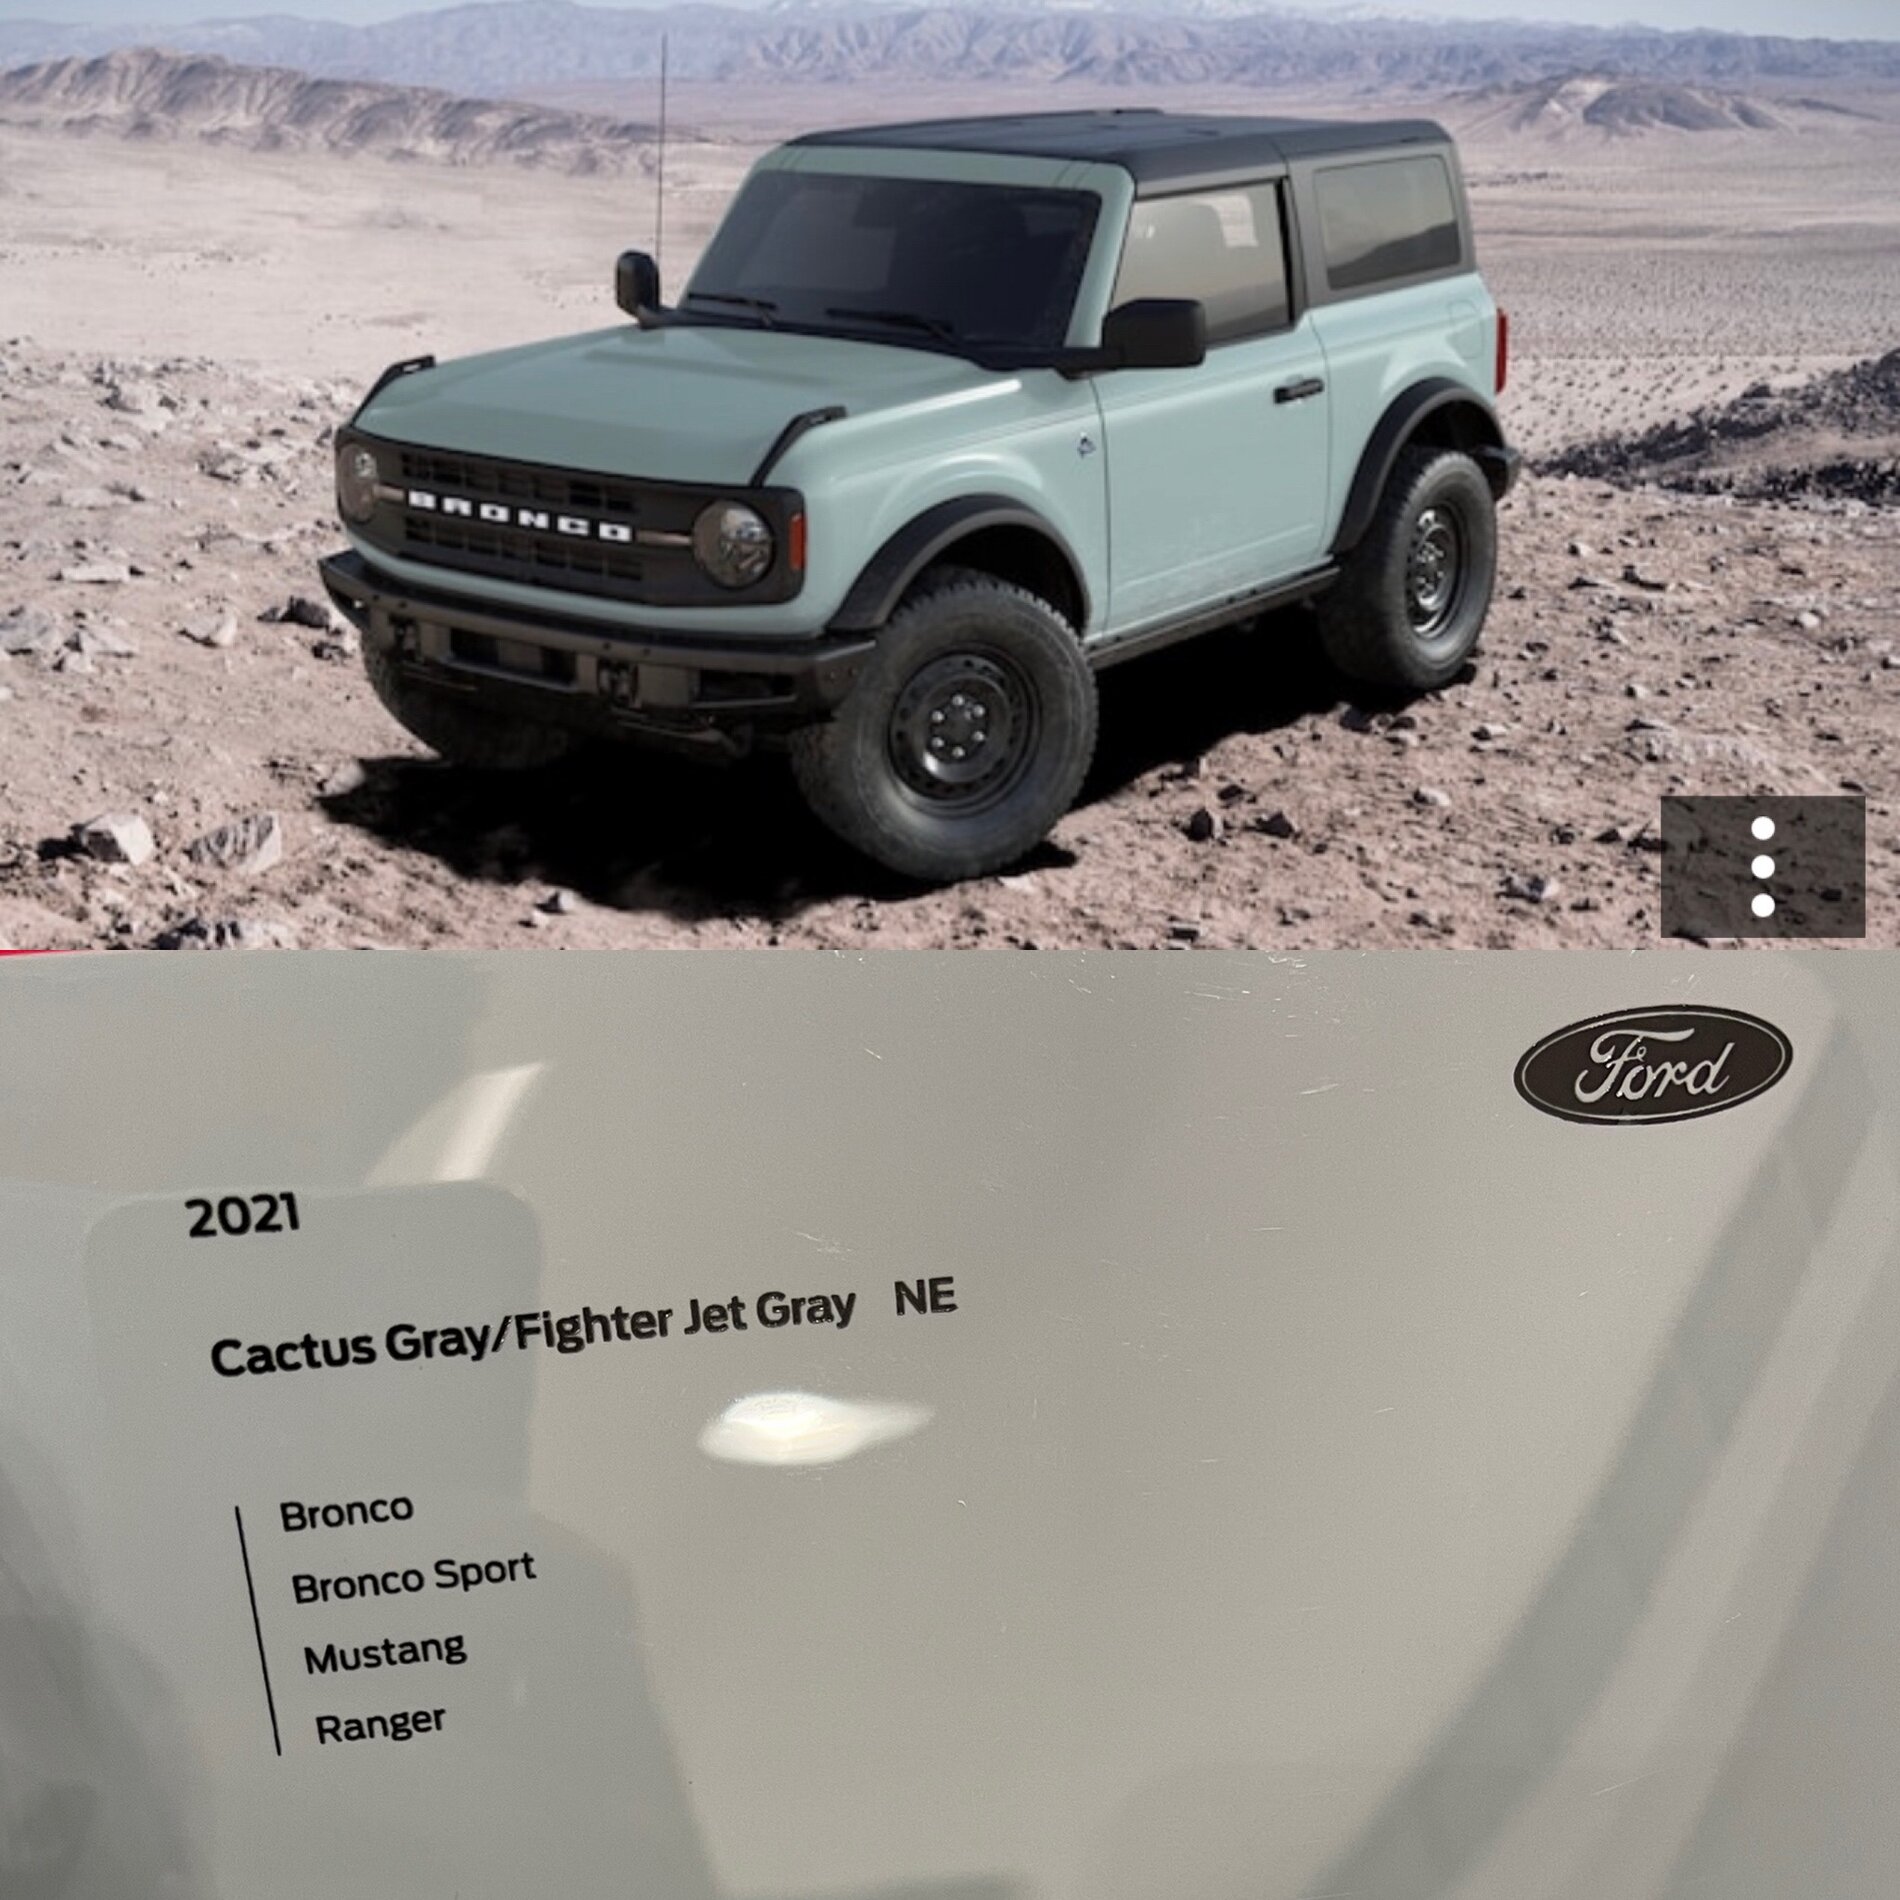 Ford Bronco Ford’s website gets the “Cactus Gray” render VERY wrong 9F6114E0-E77D-43B7-AD4A-BCB238C67F7A